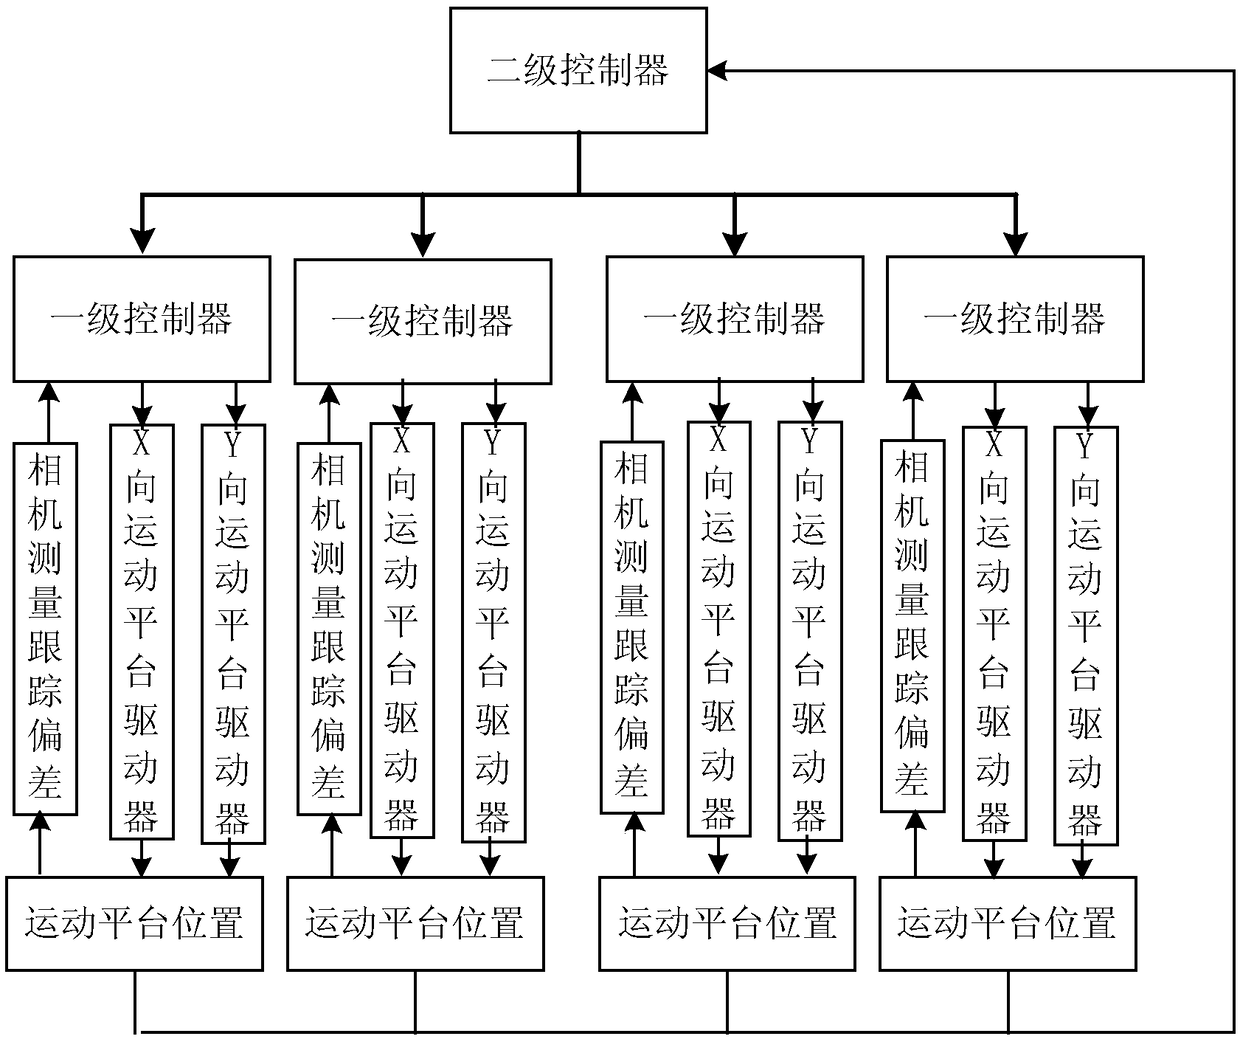 Two-stage cooperative motion control system for multi-motion platform